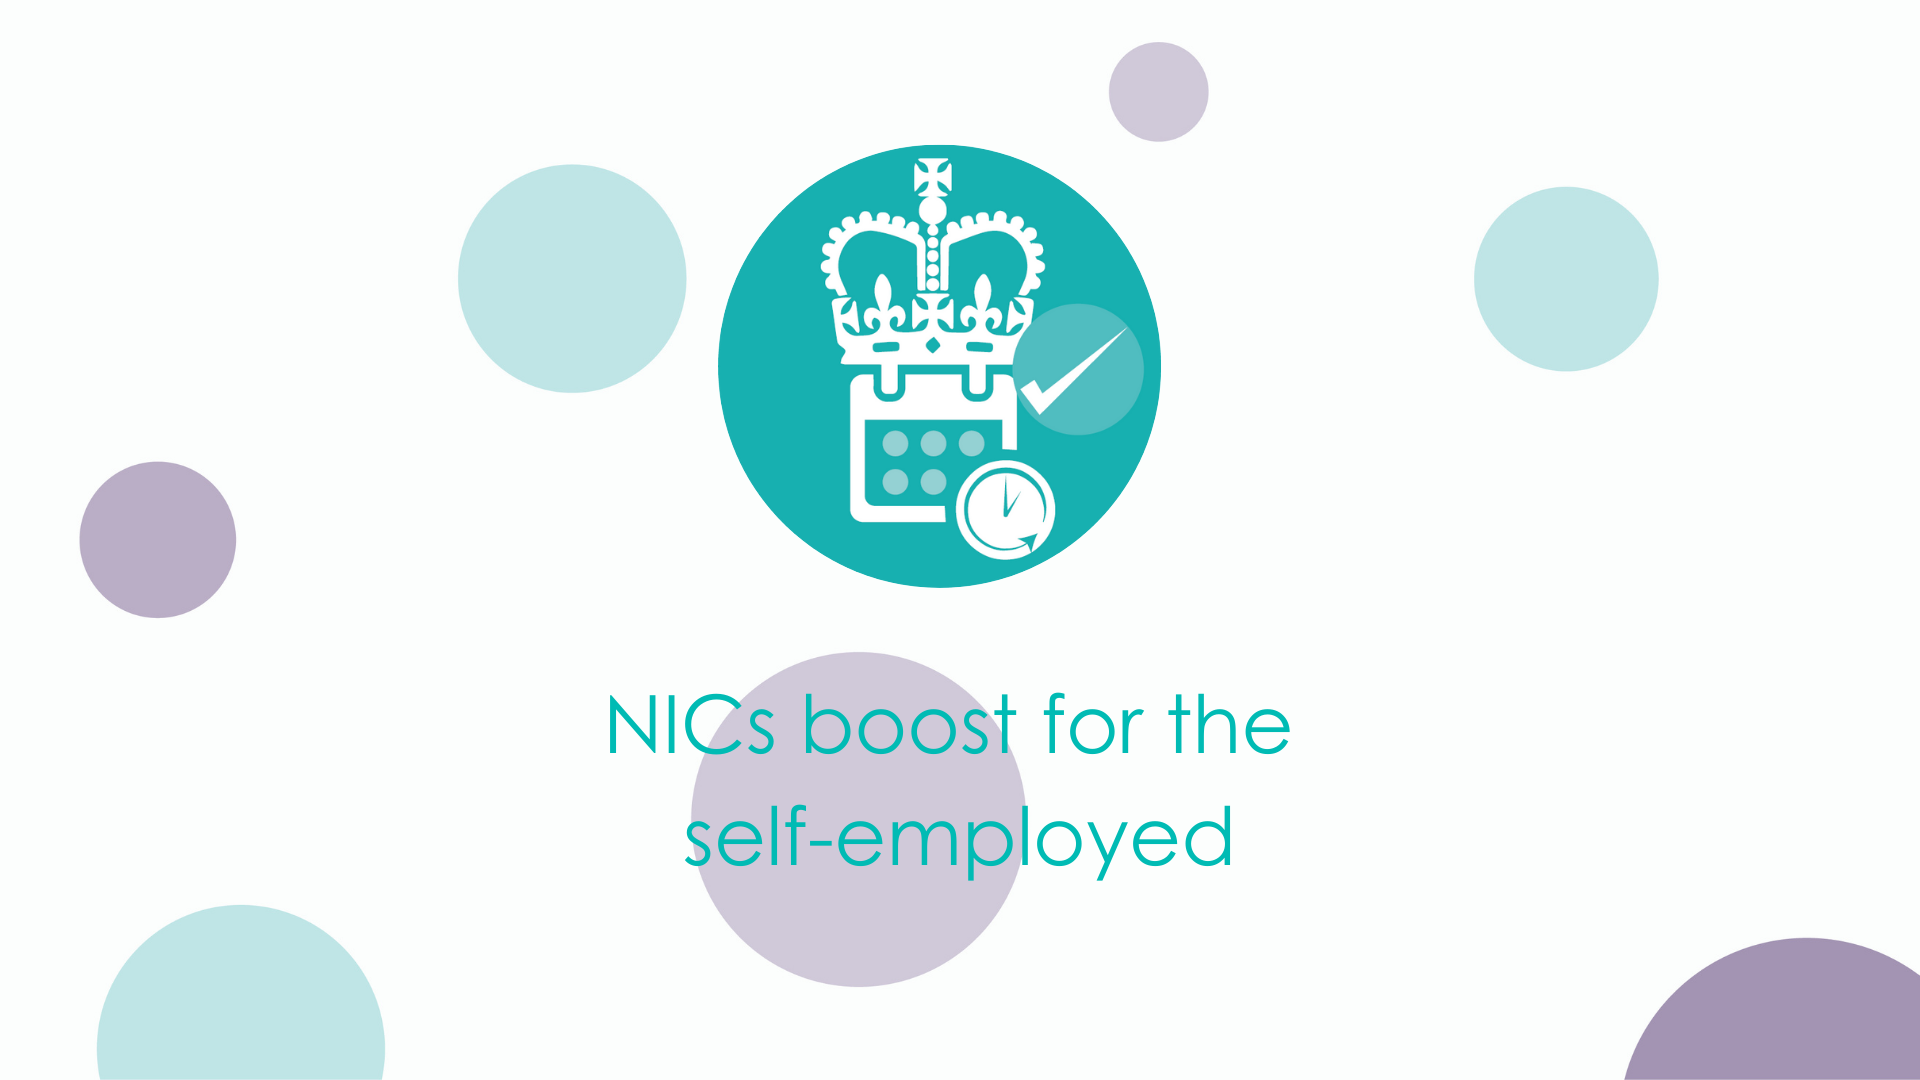 NICs boost for the self-employed